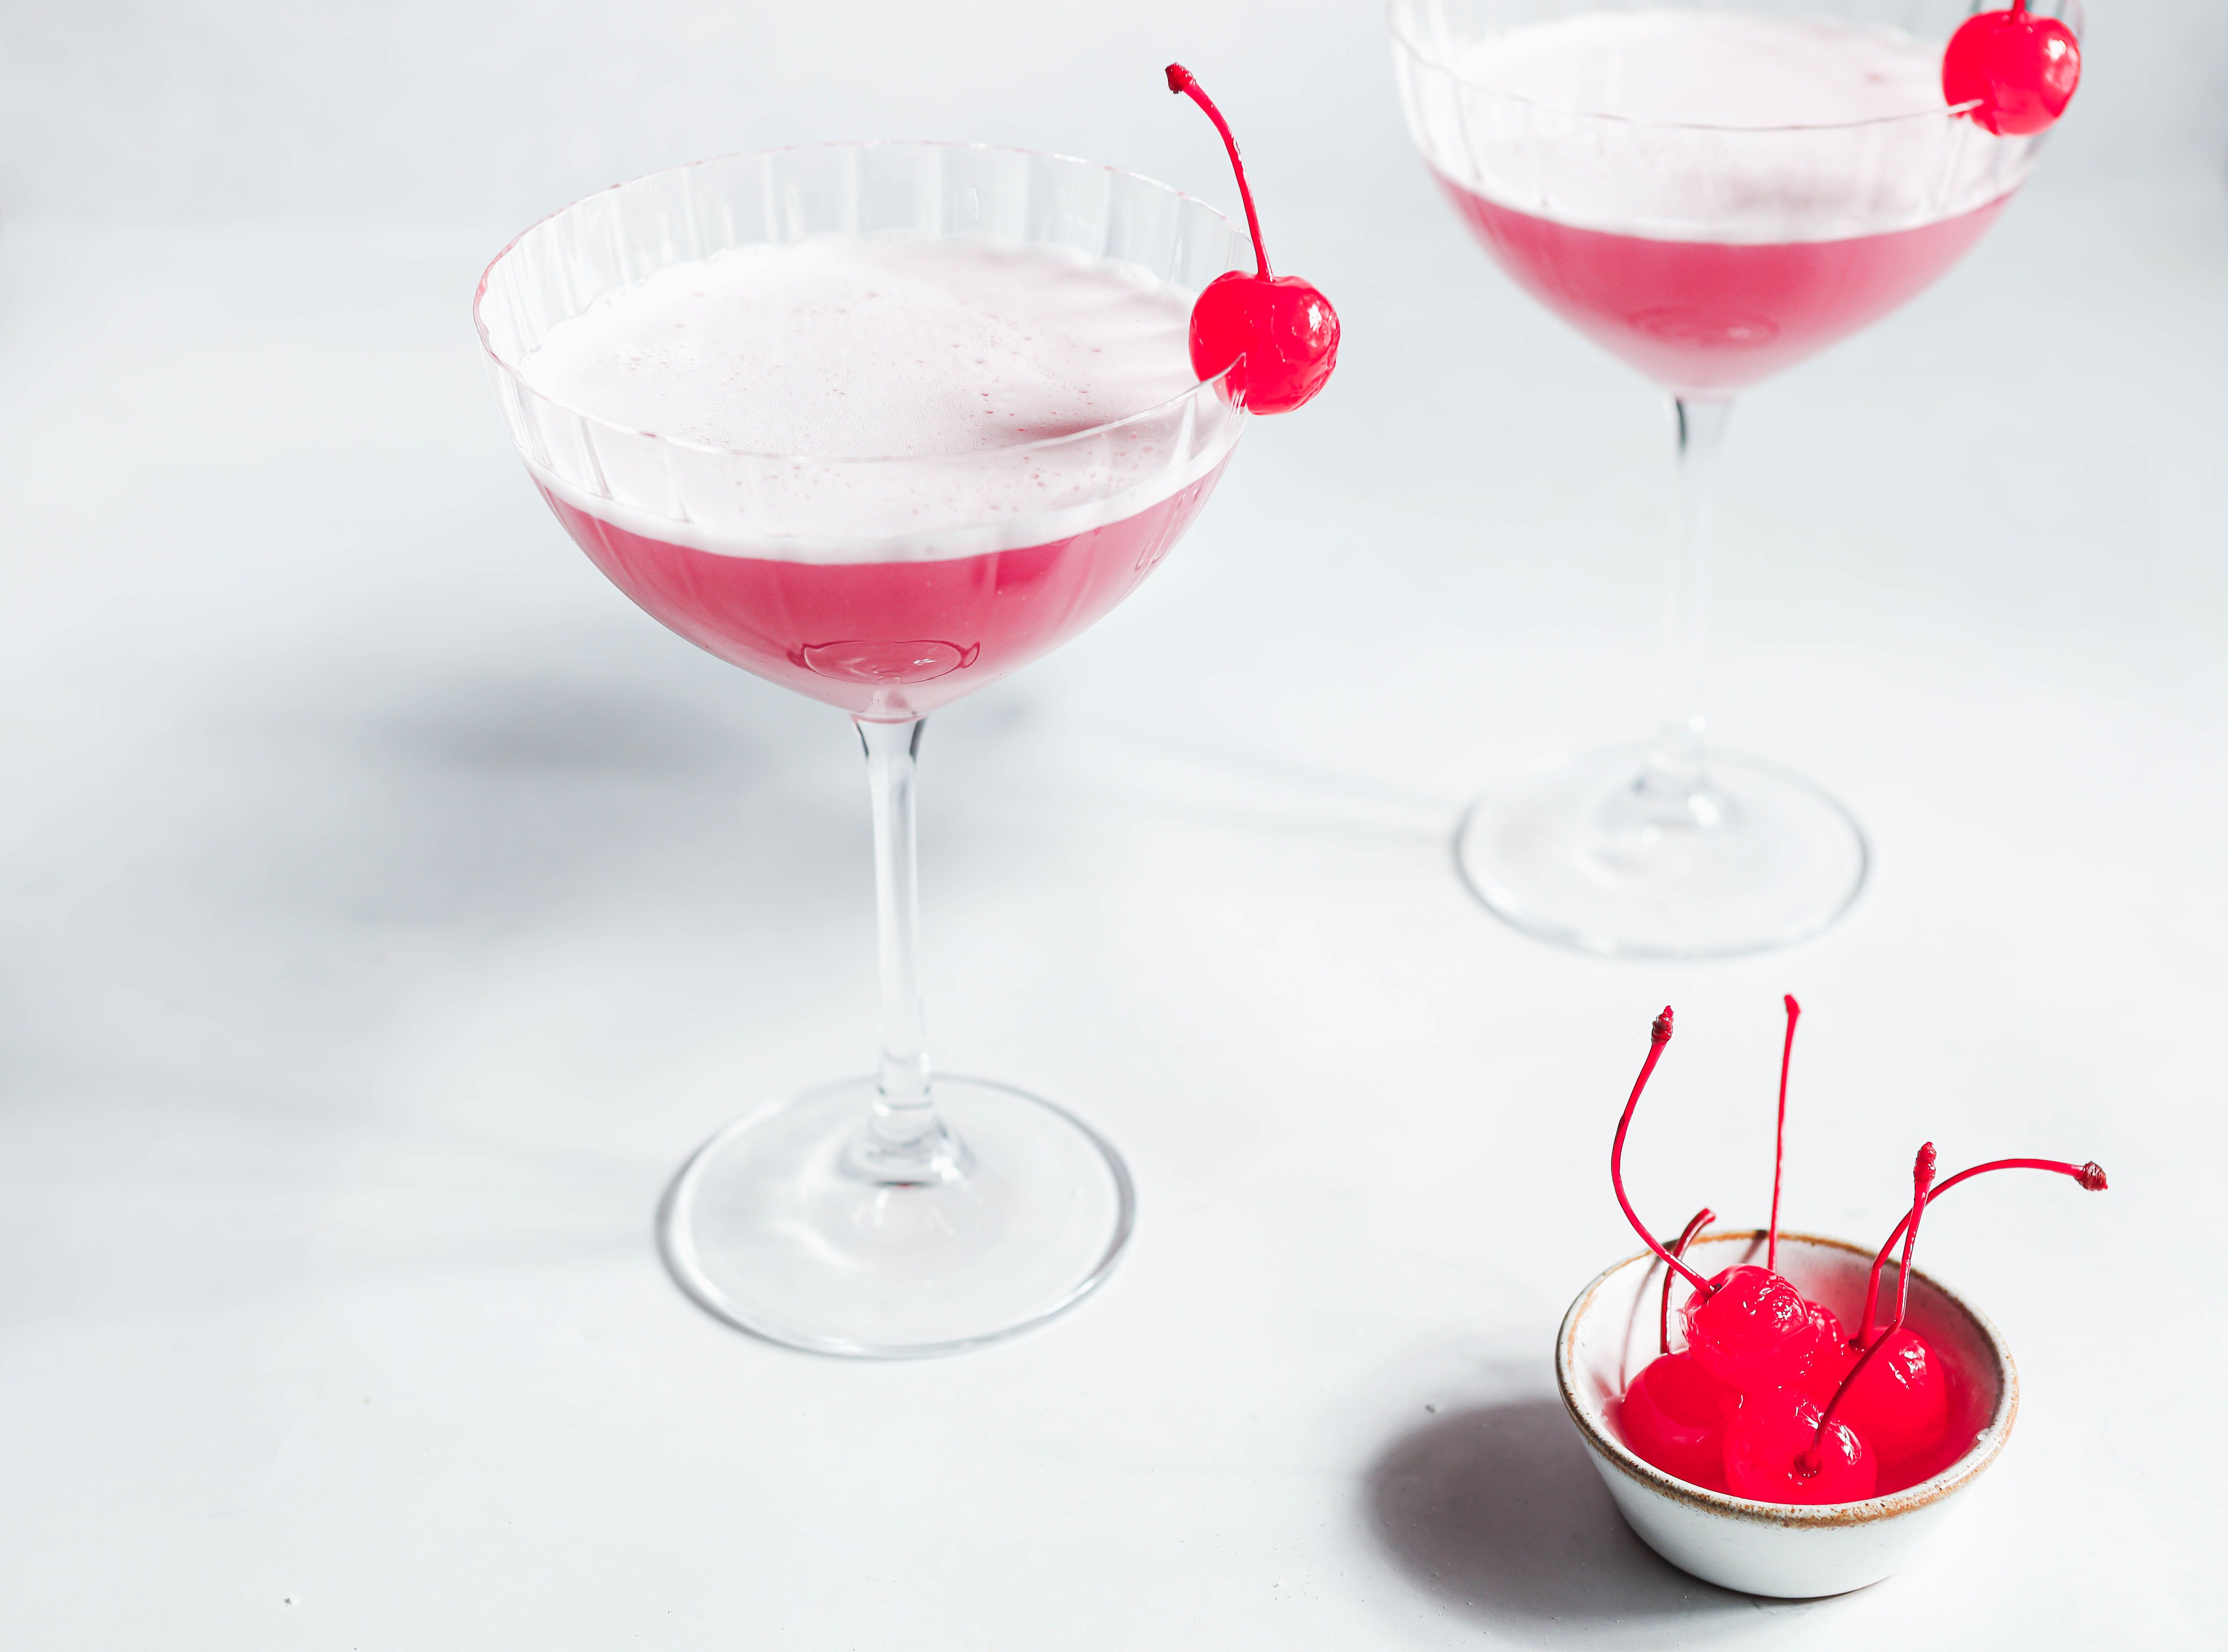 Best Pink Lady cocktail recipe  How to make a Pink Lady cocktail